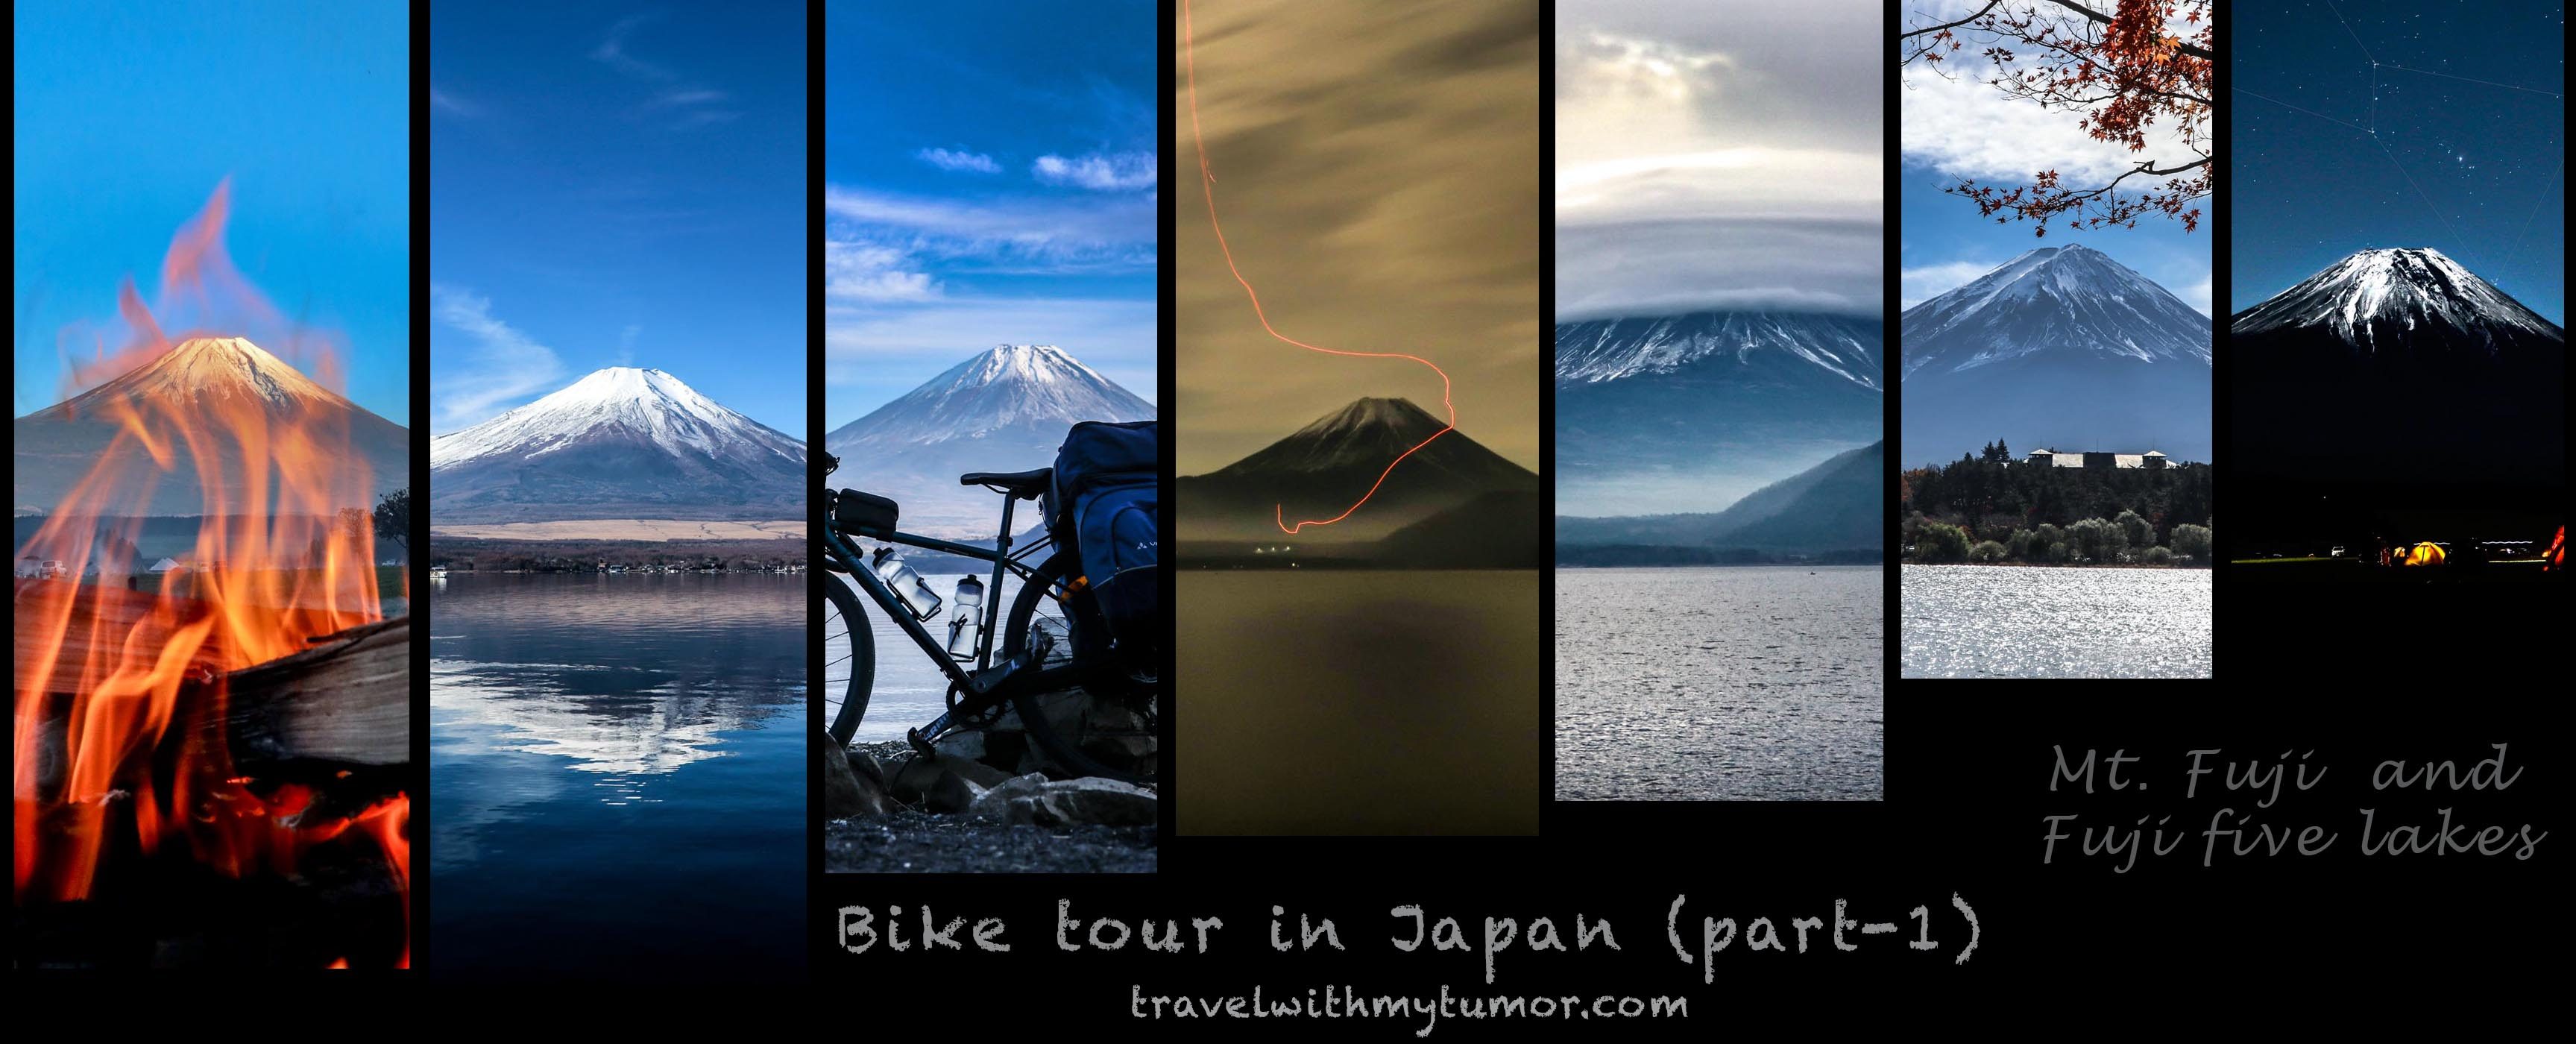  Mt. Fuji, Japan: 40 different views  The story of my solo bike tour in Japan in Nov. 2018  (Part - 1)